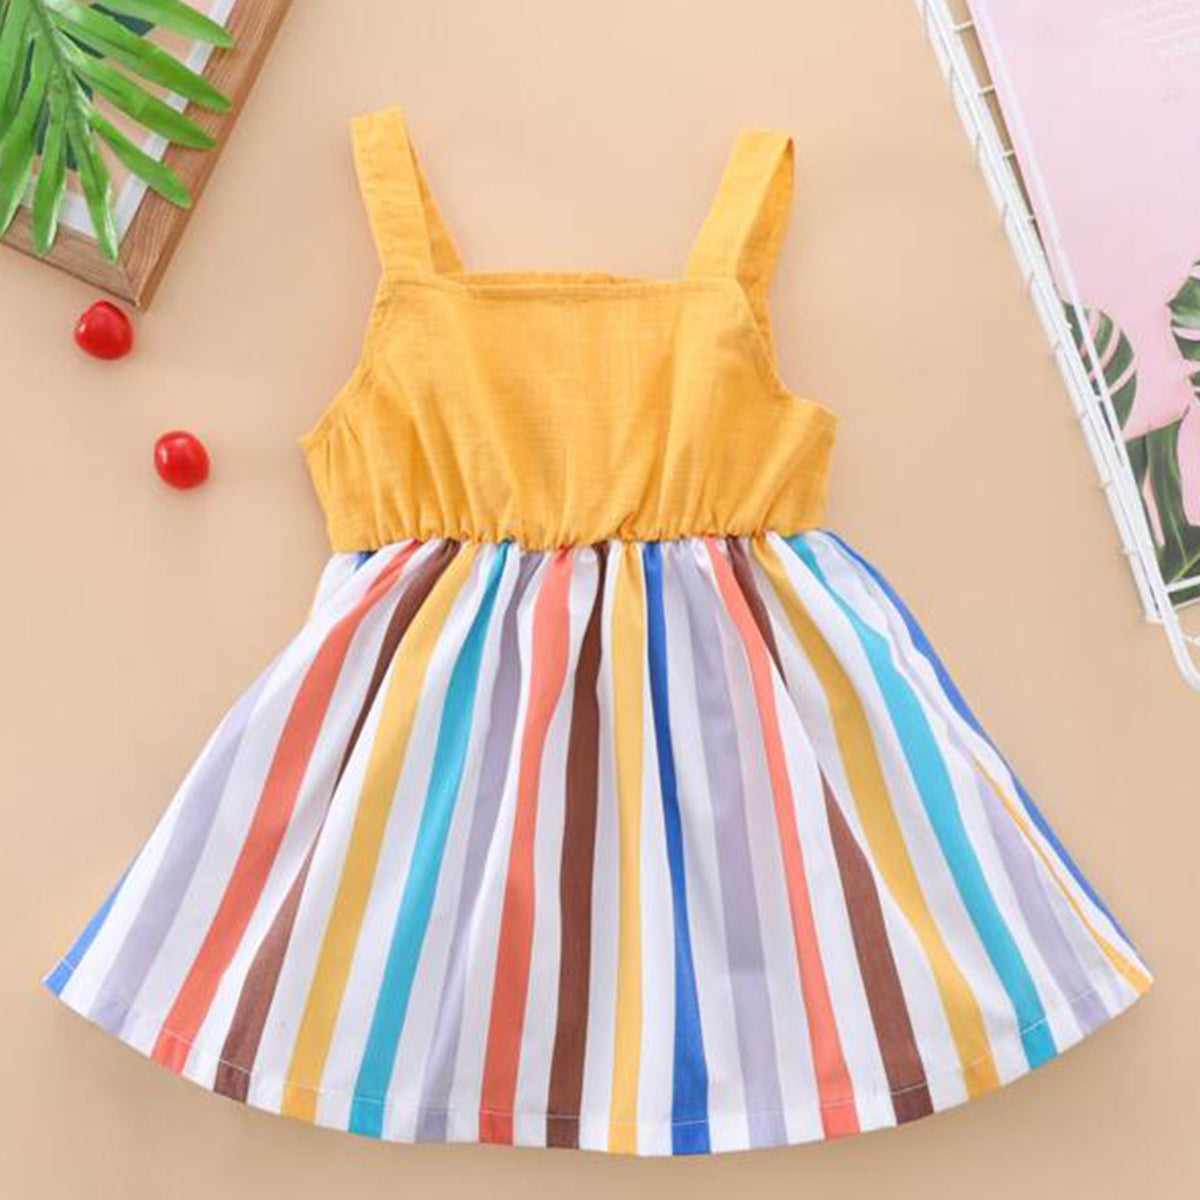 Stylish BabyGirl's White Pocket & Yellow Multi Lining & Multicolor Lining Dresses_Frocks 3 Combo for Kids.